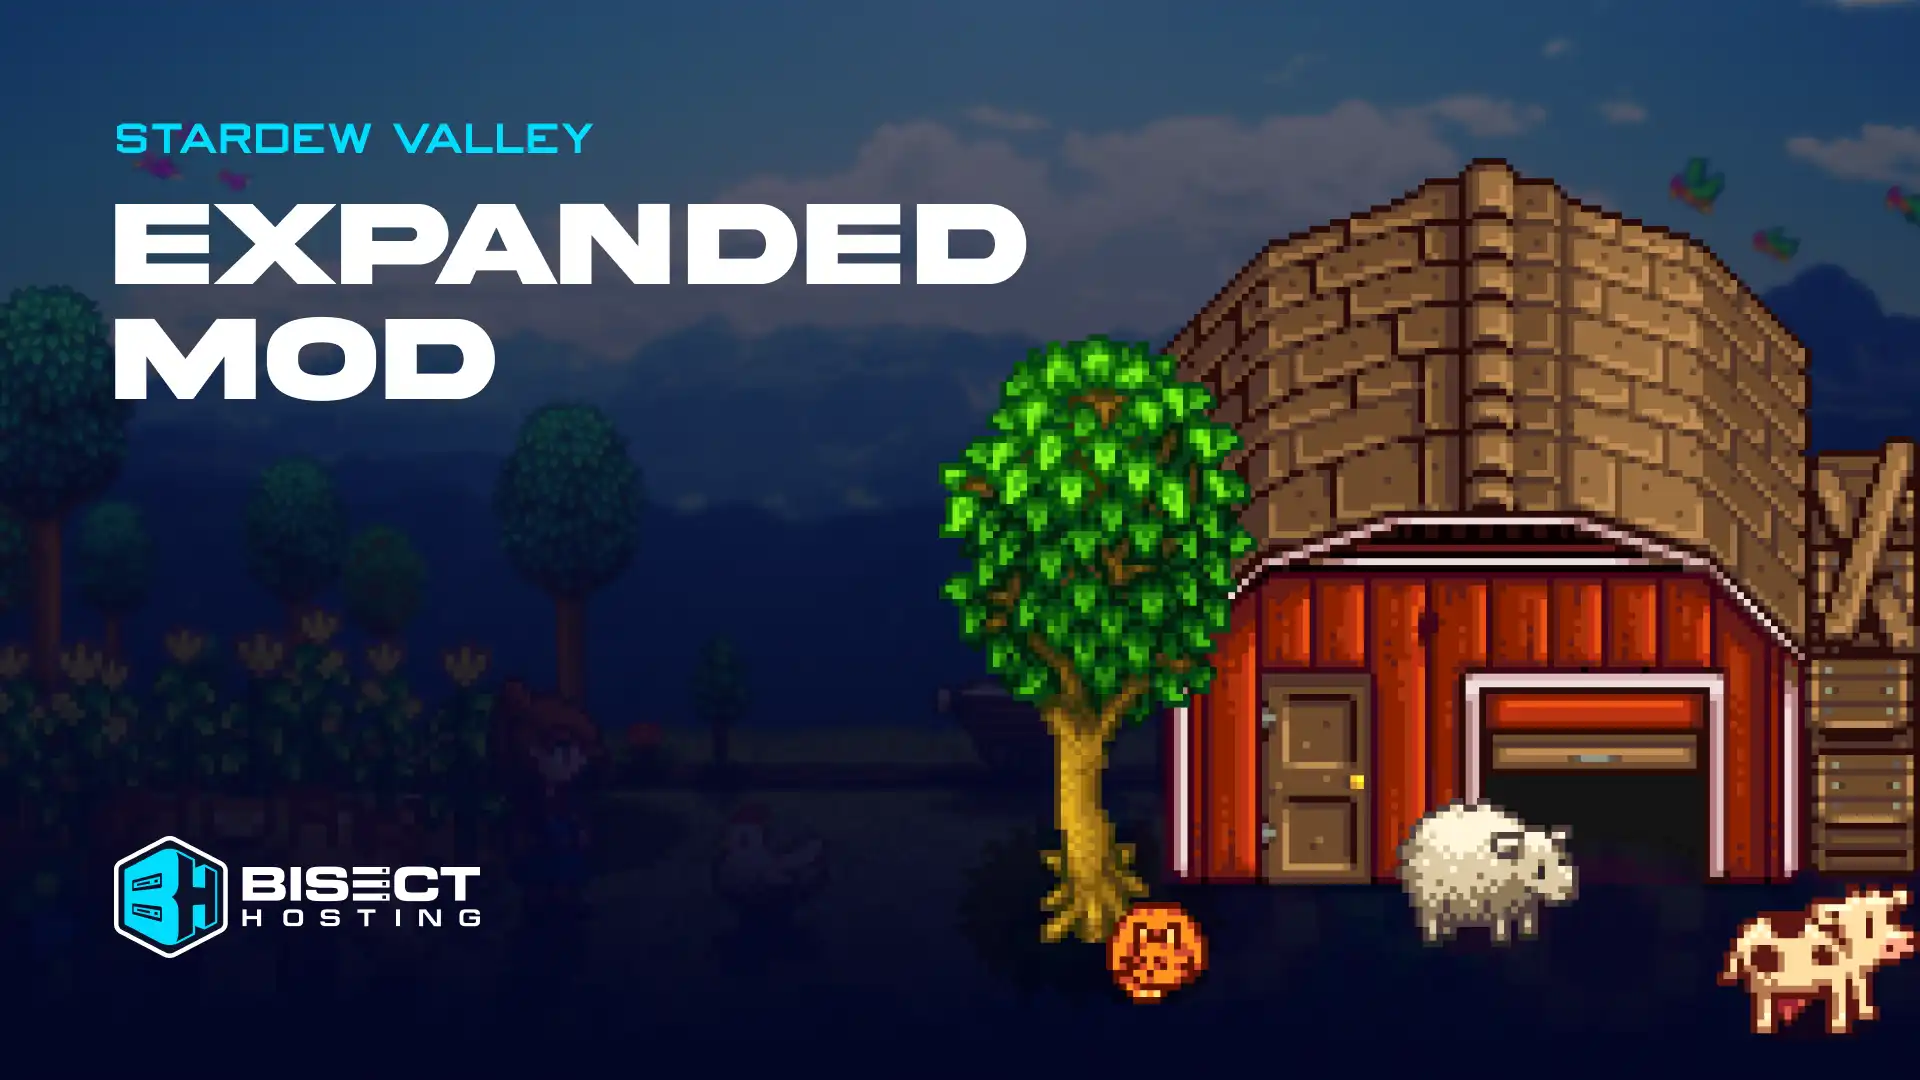 Stardew Valley Expanded Mod: Features, How to Install, and more